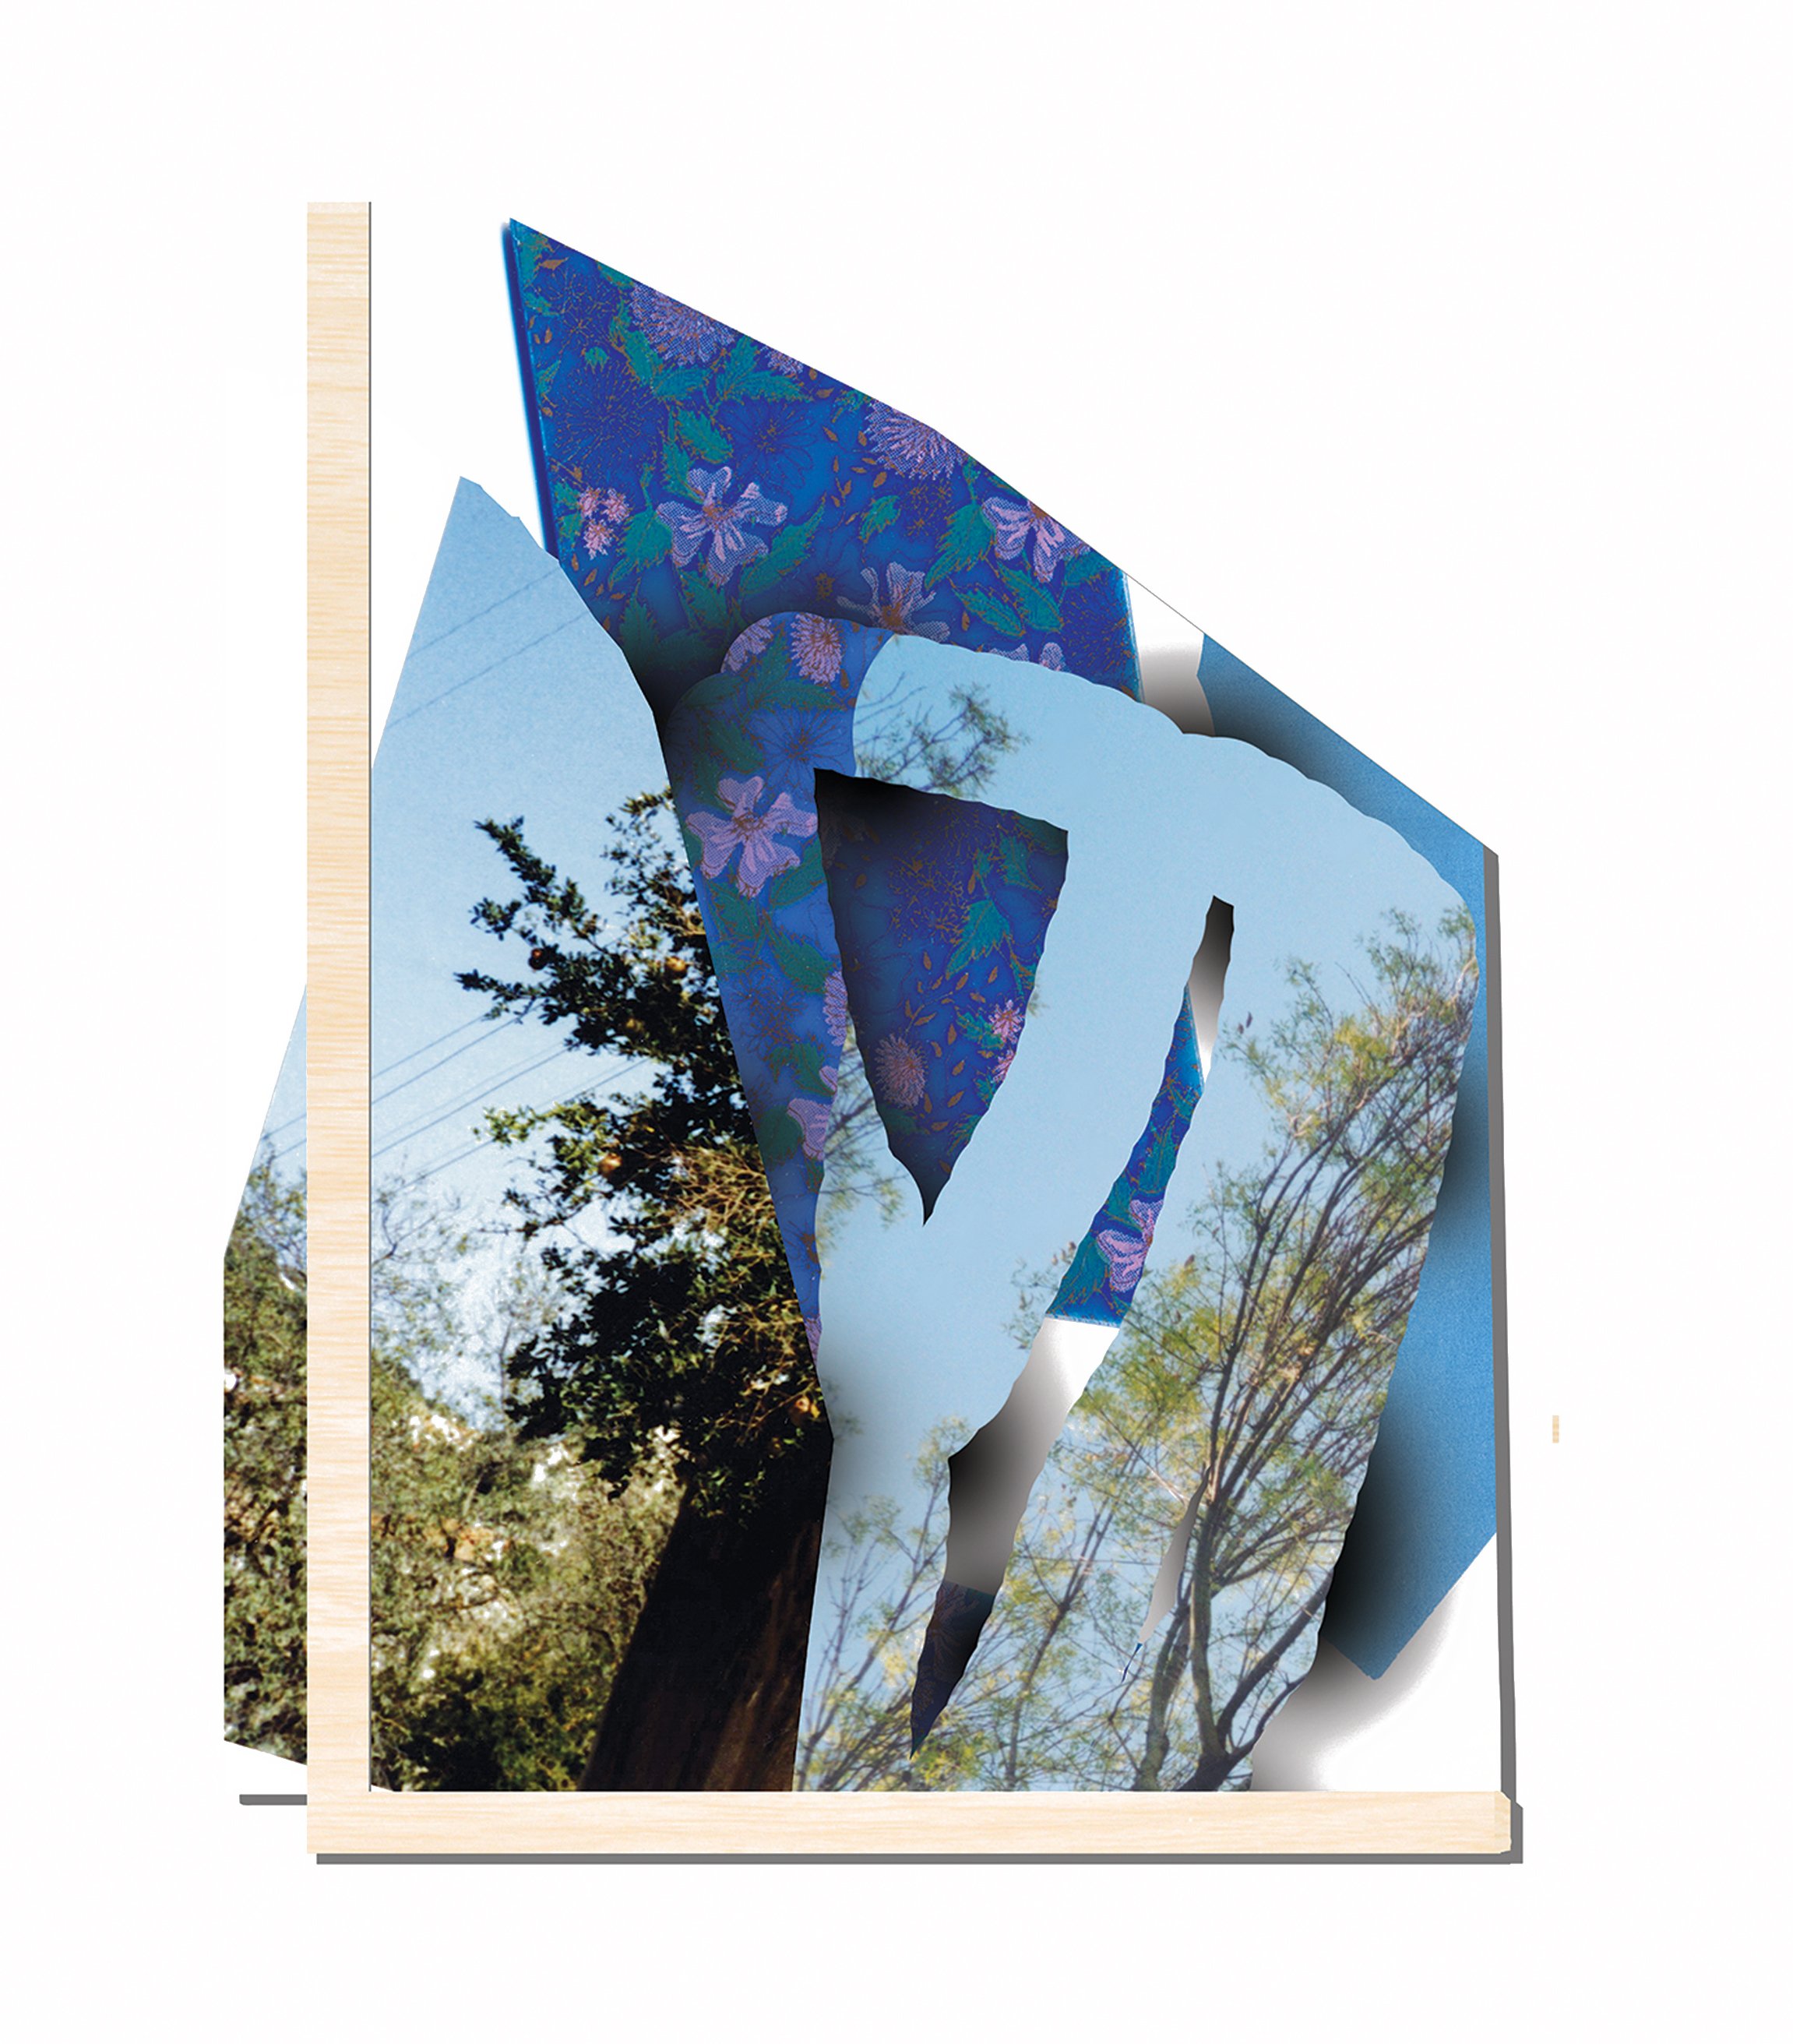 THEN, THERE, THAT'S HOW I SAW IT | 20 x 16 inches / 50.8 x 40.6 cm, dye sublimation on shaped aluminum, with frame, 2023